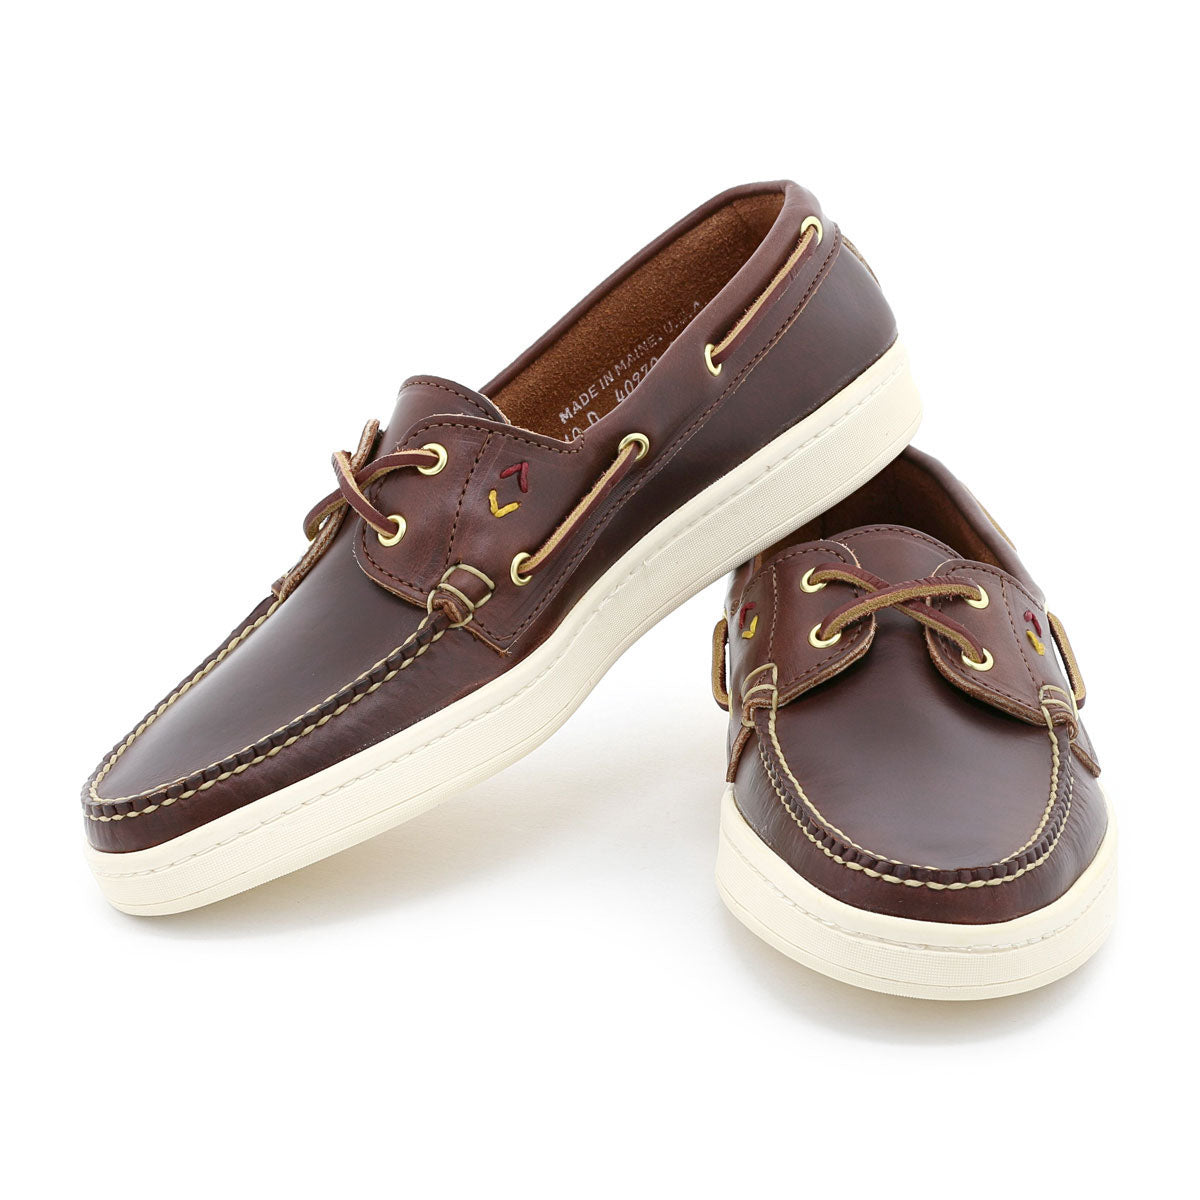 Traveler Boat Shoe - Dark Brown Chromexcel | Rancourt & Co. | Men's Boots  and Shoes